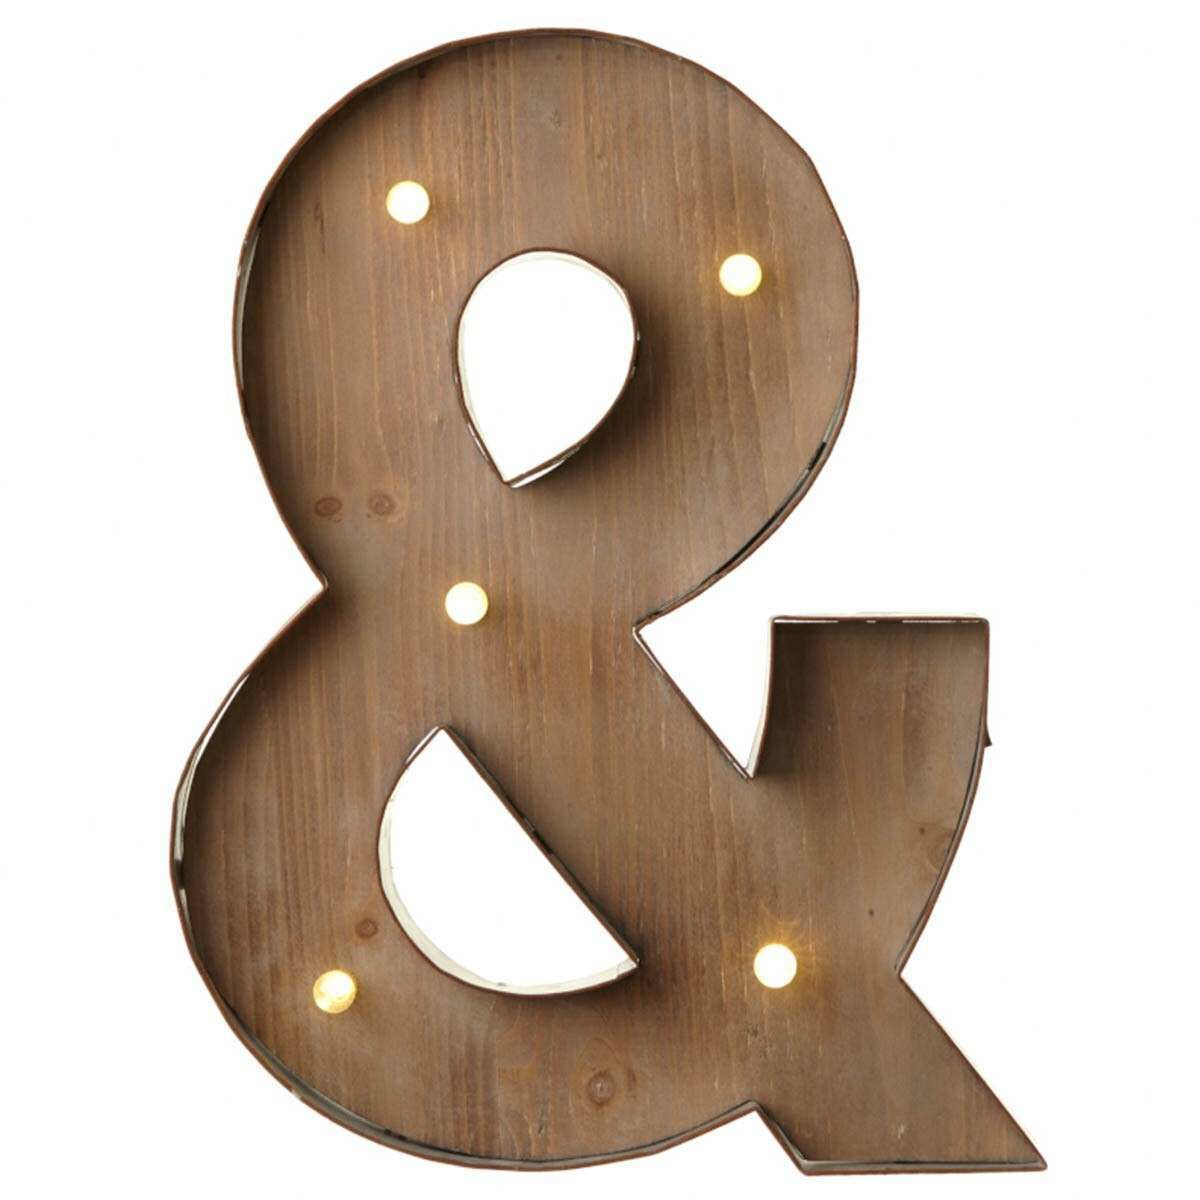 Wood & Metal '&' Battery Light Up Circus Letter, 41cm image 2